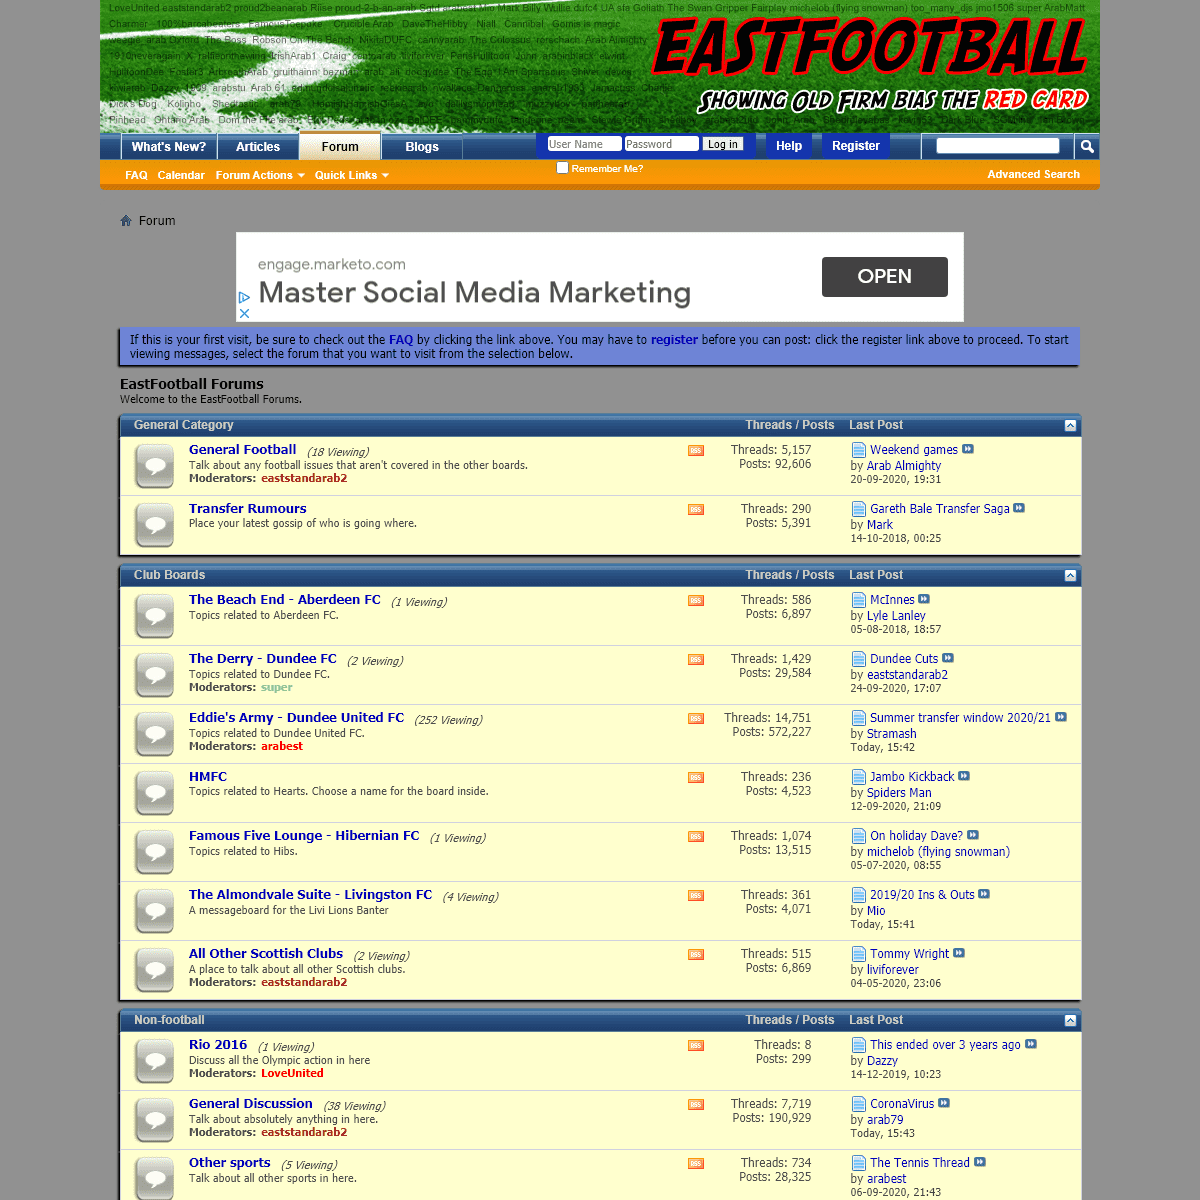 A complete backup of www.eastfootball.co.uk